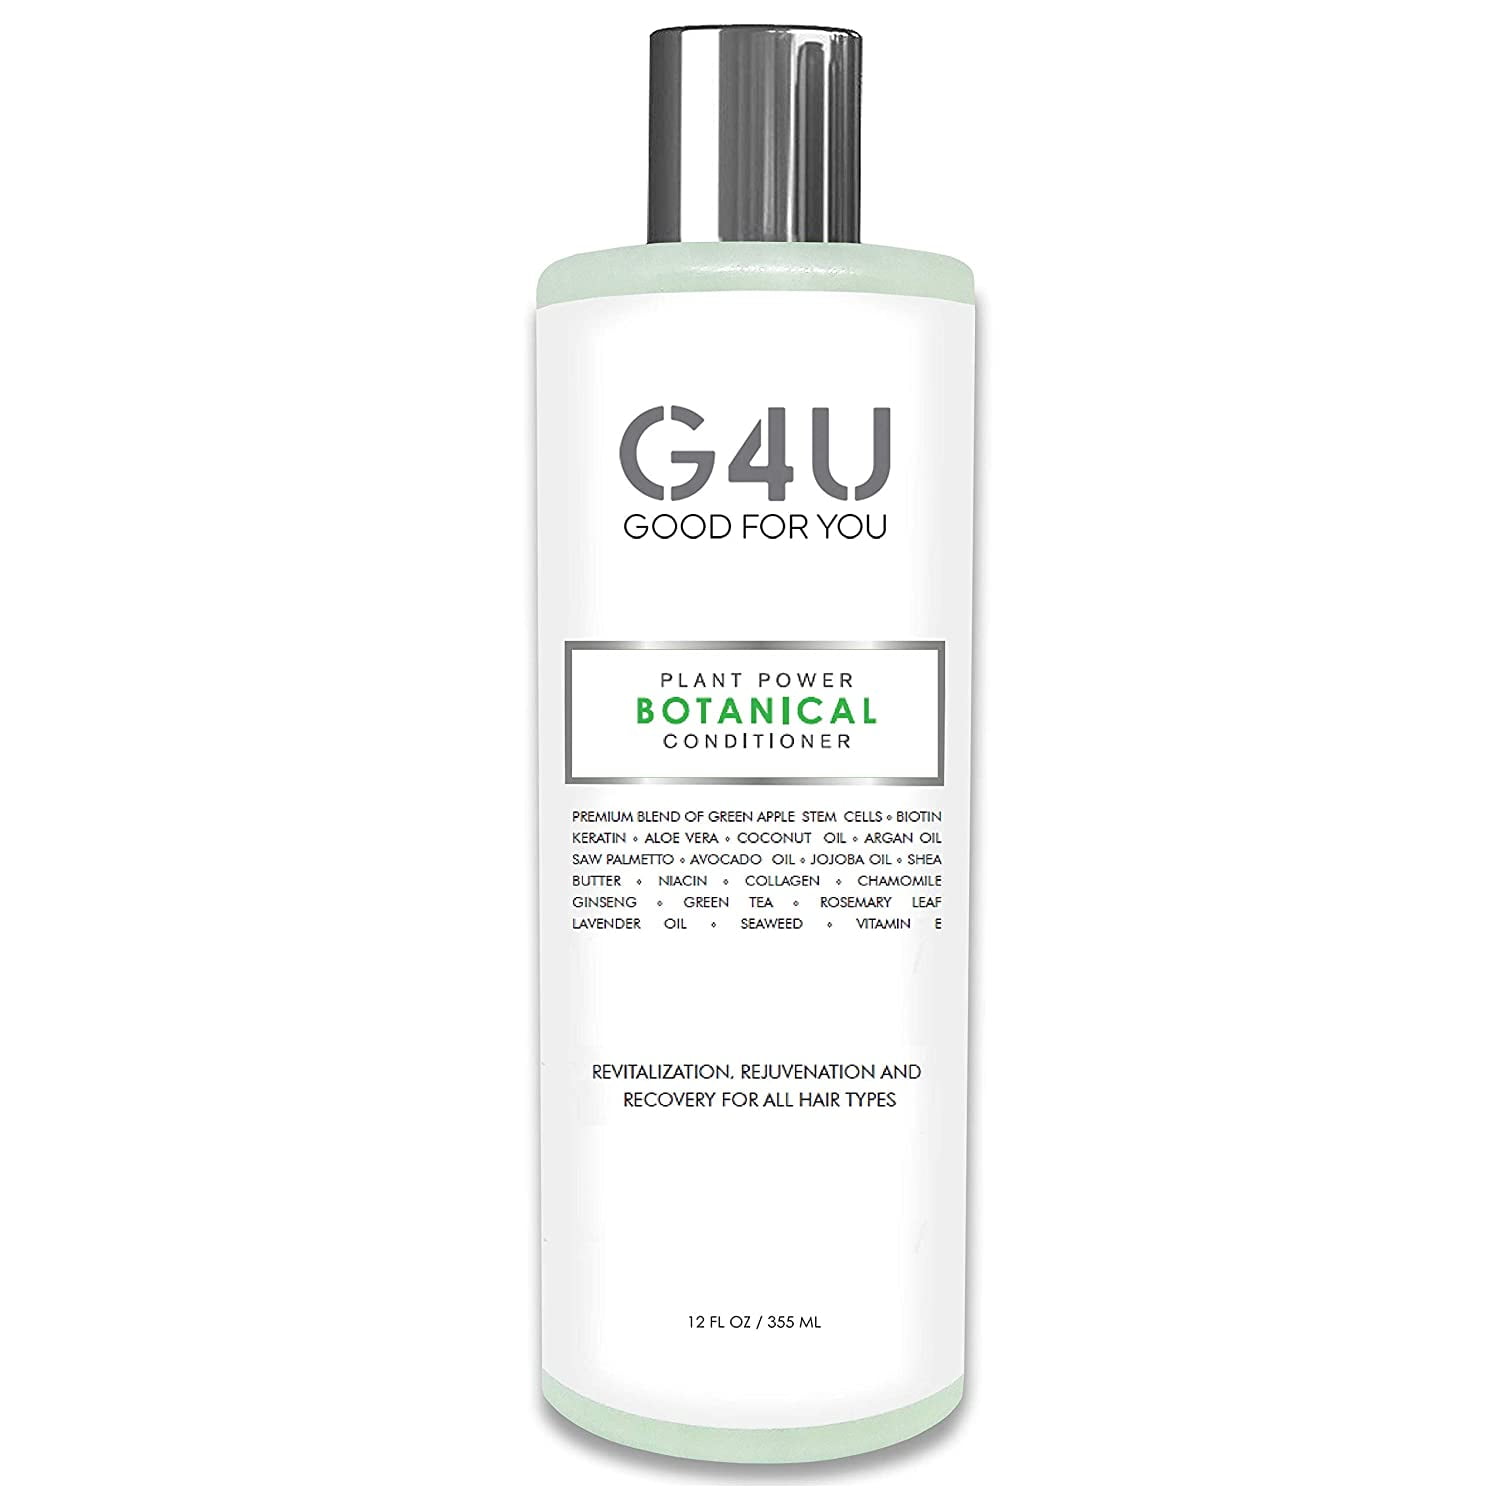 G4U Botanical Hair Conditioner For Women And Men All Hair Types, Dry,  Damaged, Color Treated. Sulfate Free Natural Plant Based With Keratin,  Biotin And More. Ideal For Home, Spas, Salons. 12 Fl